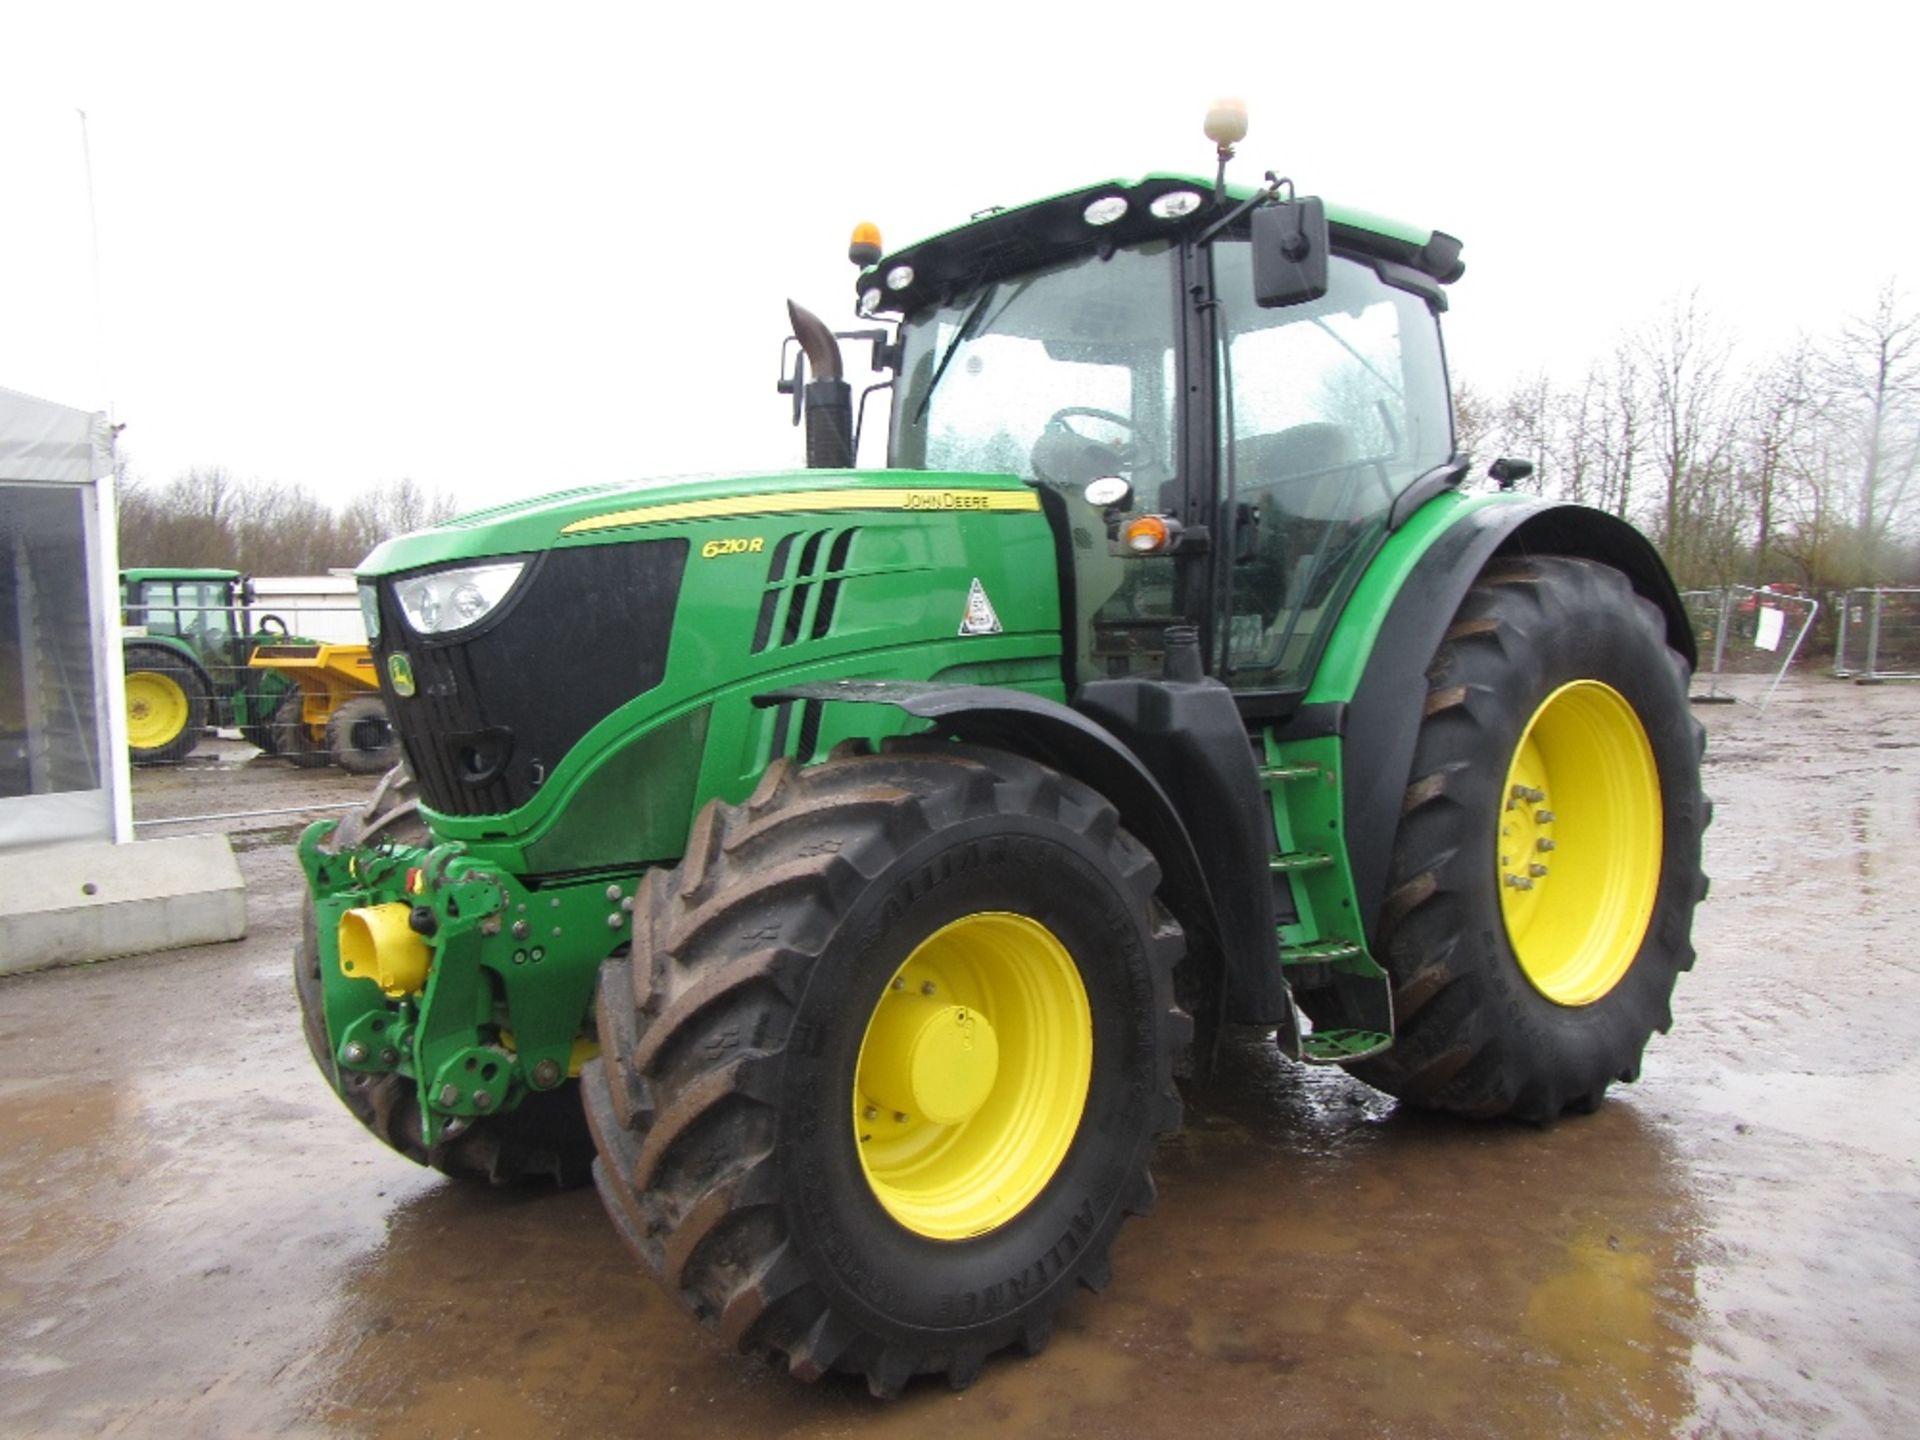 2013 John Deere 6210R 4wd Tractor c/w 50kph, Auto Power Command Arm, Front Linkage & PTO, Air